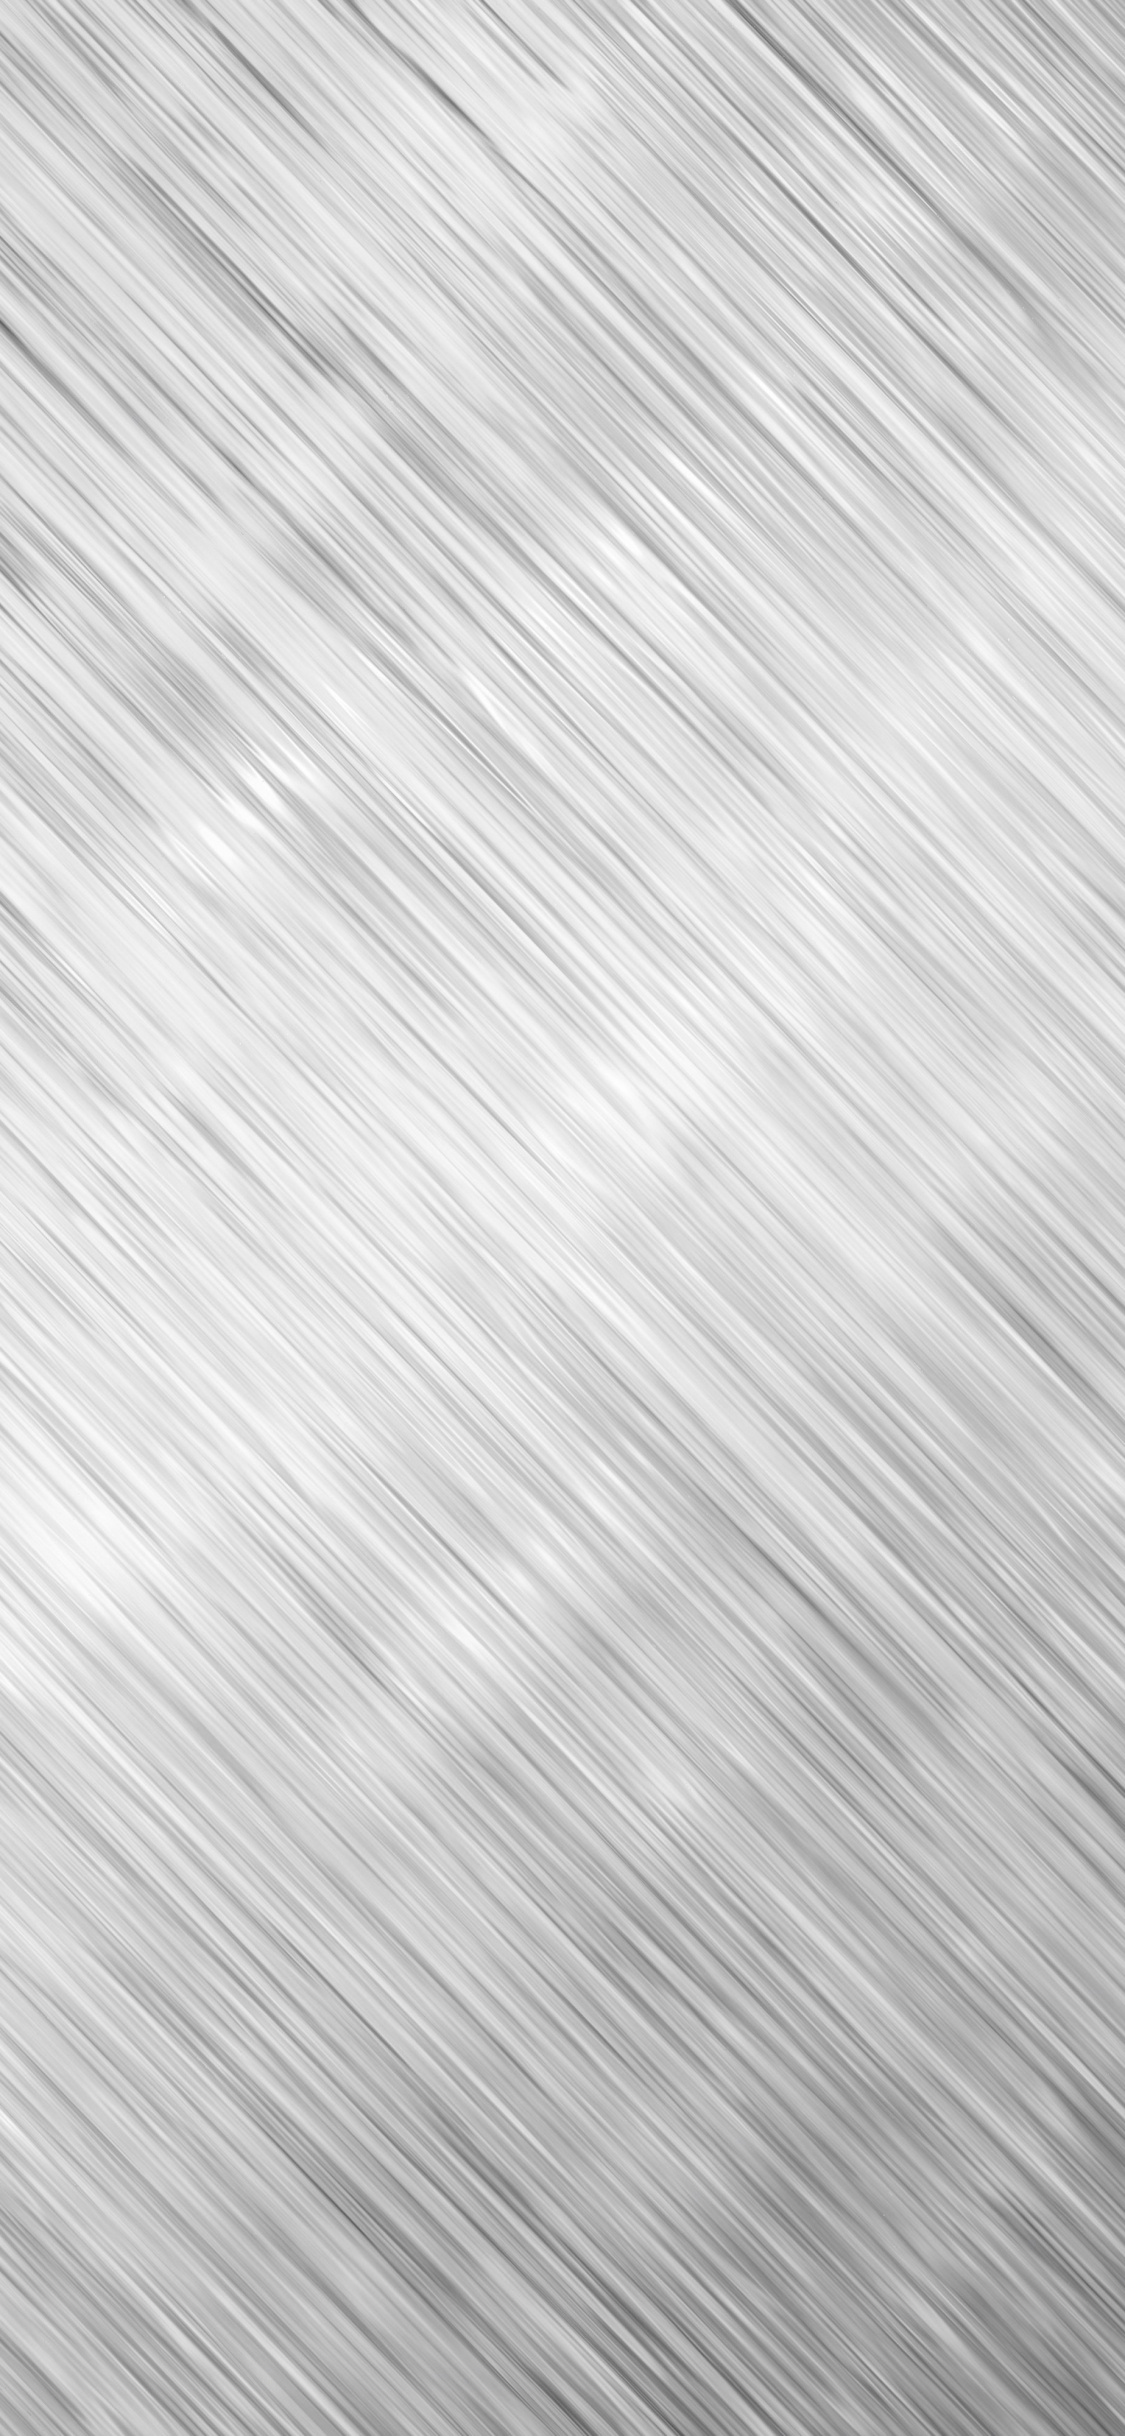 Grey and White Striped Textile. Wallpaper in 1125x2436 Resolution